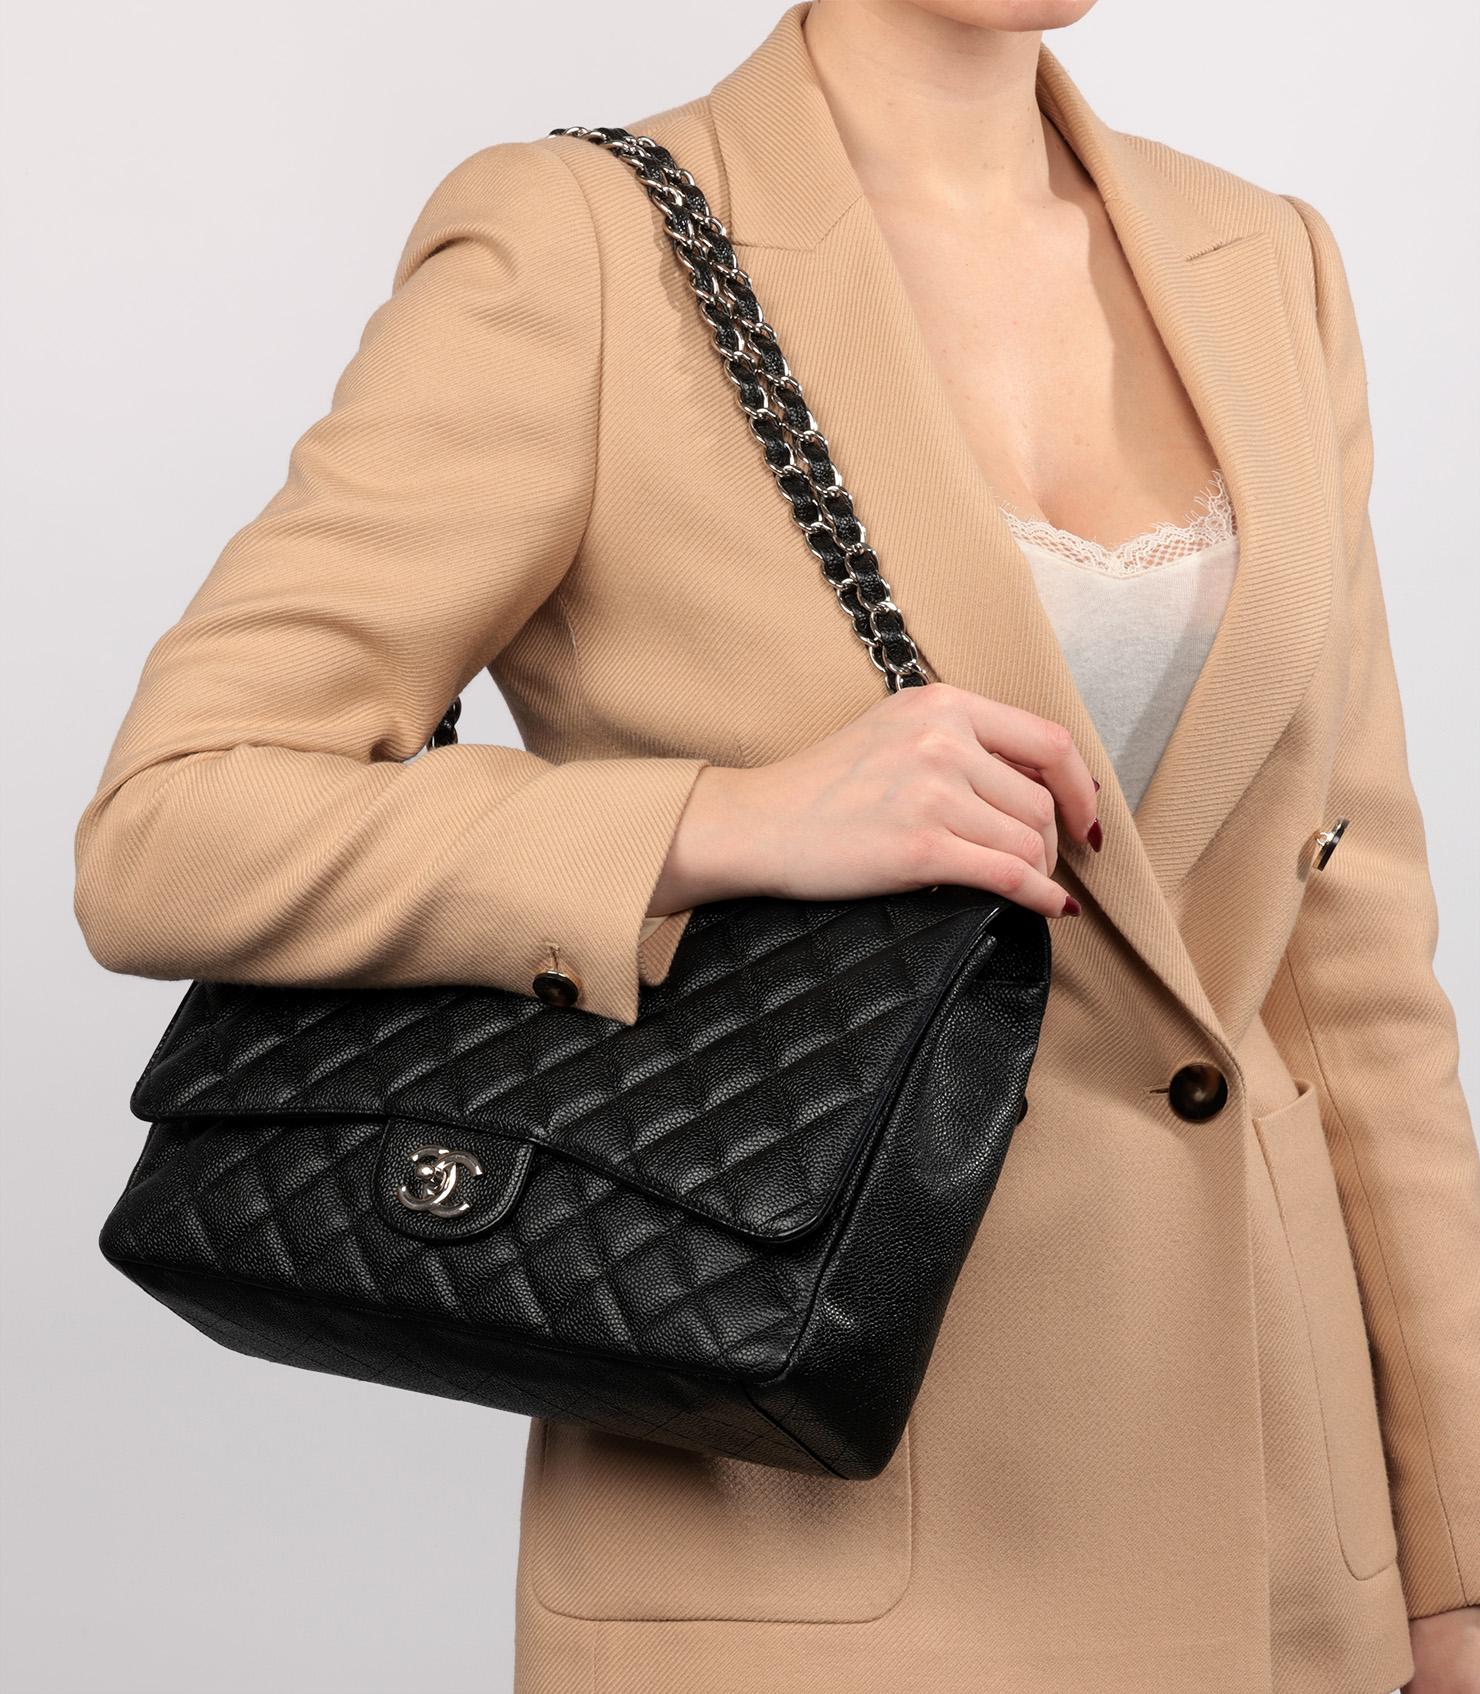 Chanel Black Quilted Caviar Leather Maxi Classic Single Flap Bag

Brand- Chanel
Model- Maxi Classic Single Flap Bag
Product Type- Crossbody, Shoulder
Serial Number- 13******
Age- Circa 2009
Colour- Black
Hardware- Silver
Material(s)- Caviar